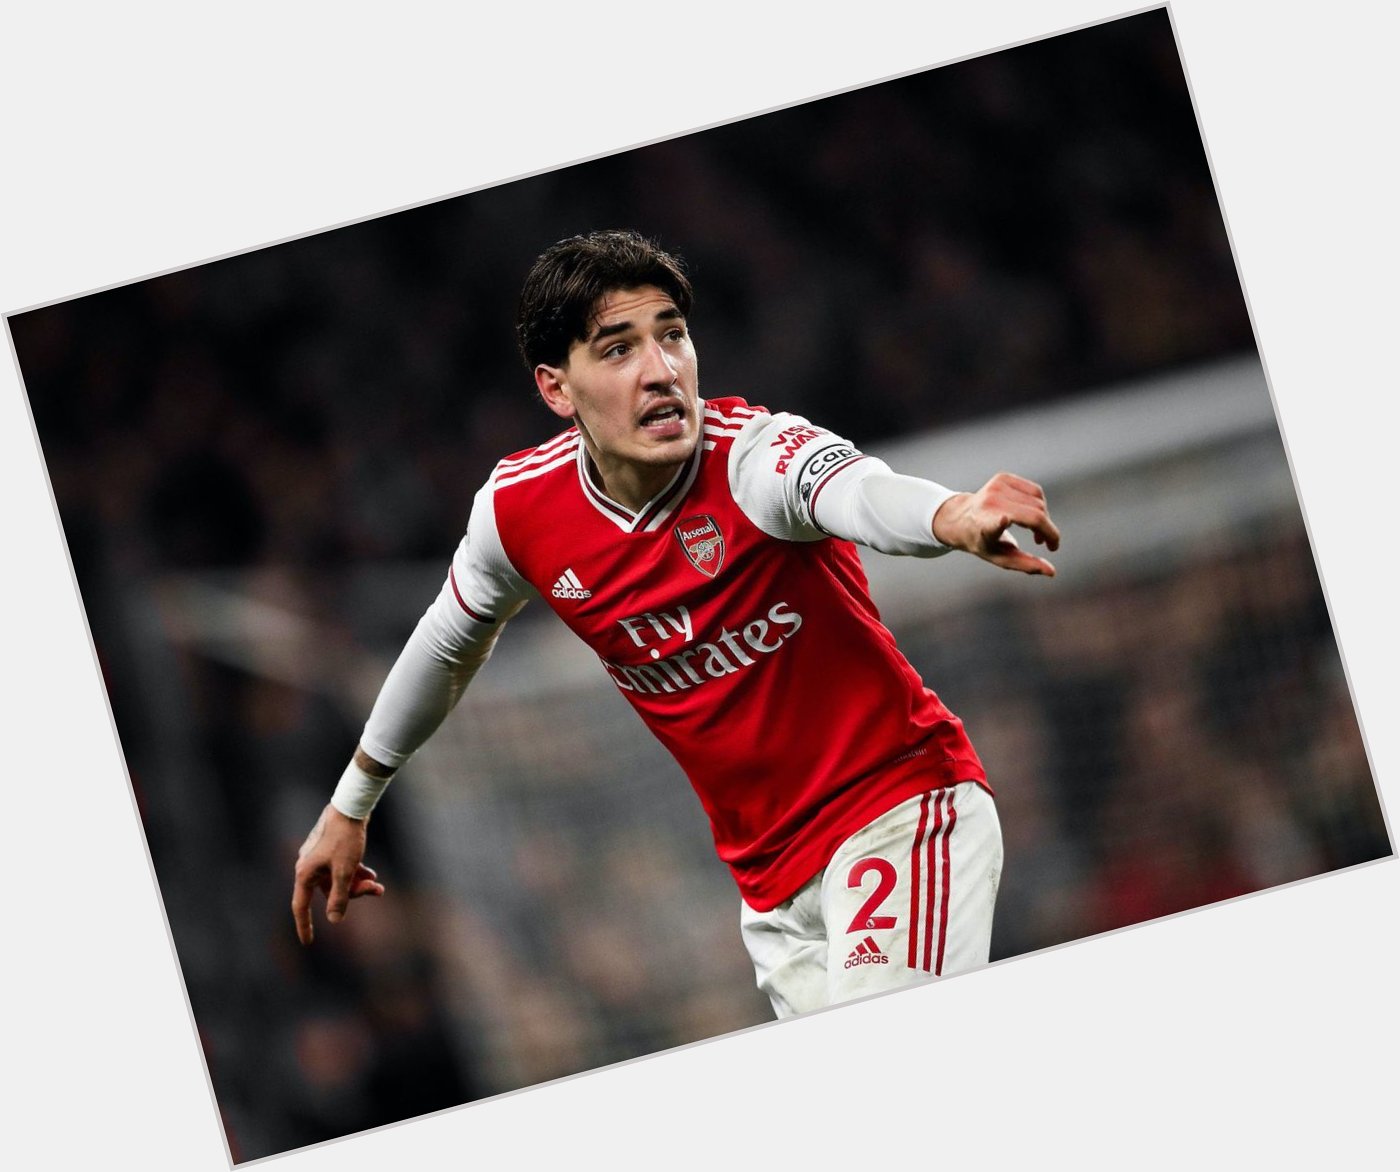 Happy birthday to Arsenal s Hector Bellerin!

A captain, role model and nearly a decade of service at Arsenal.  